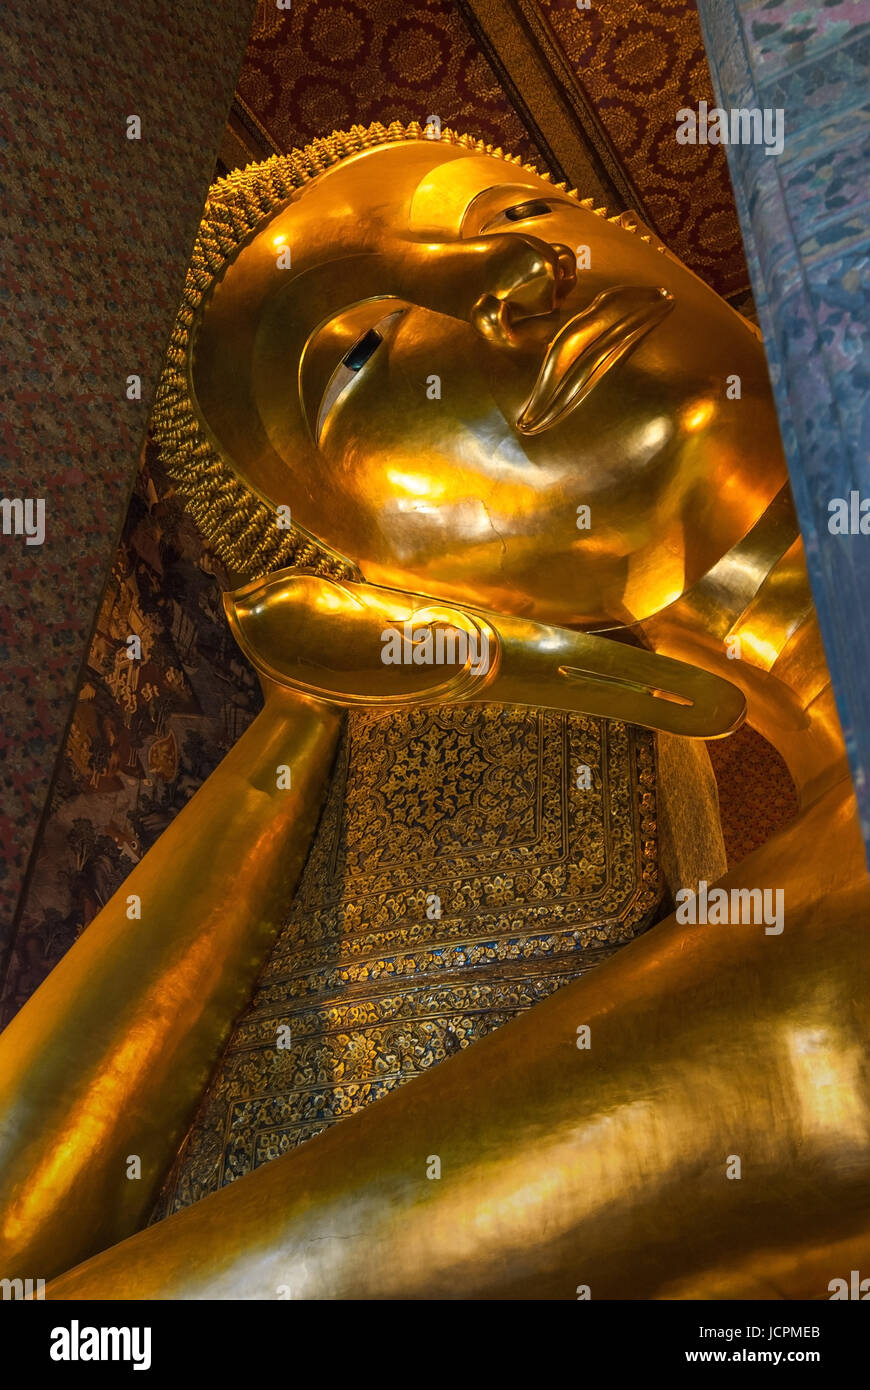 The gold leaf covered face and arm of the Laying Buddha in the Wat Pho, Bangkok, Thailand. Stock Photo